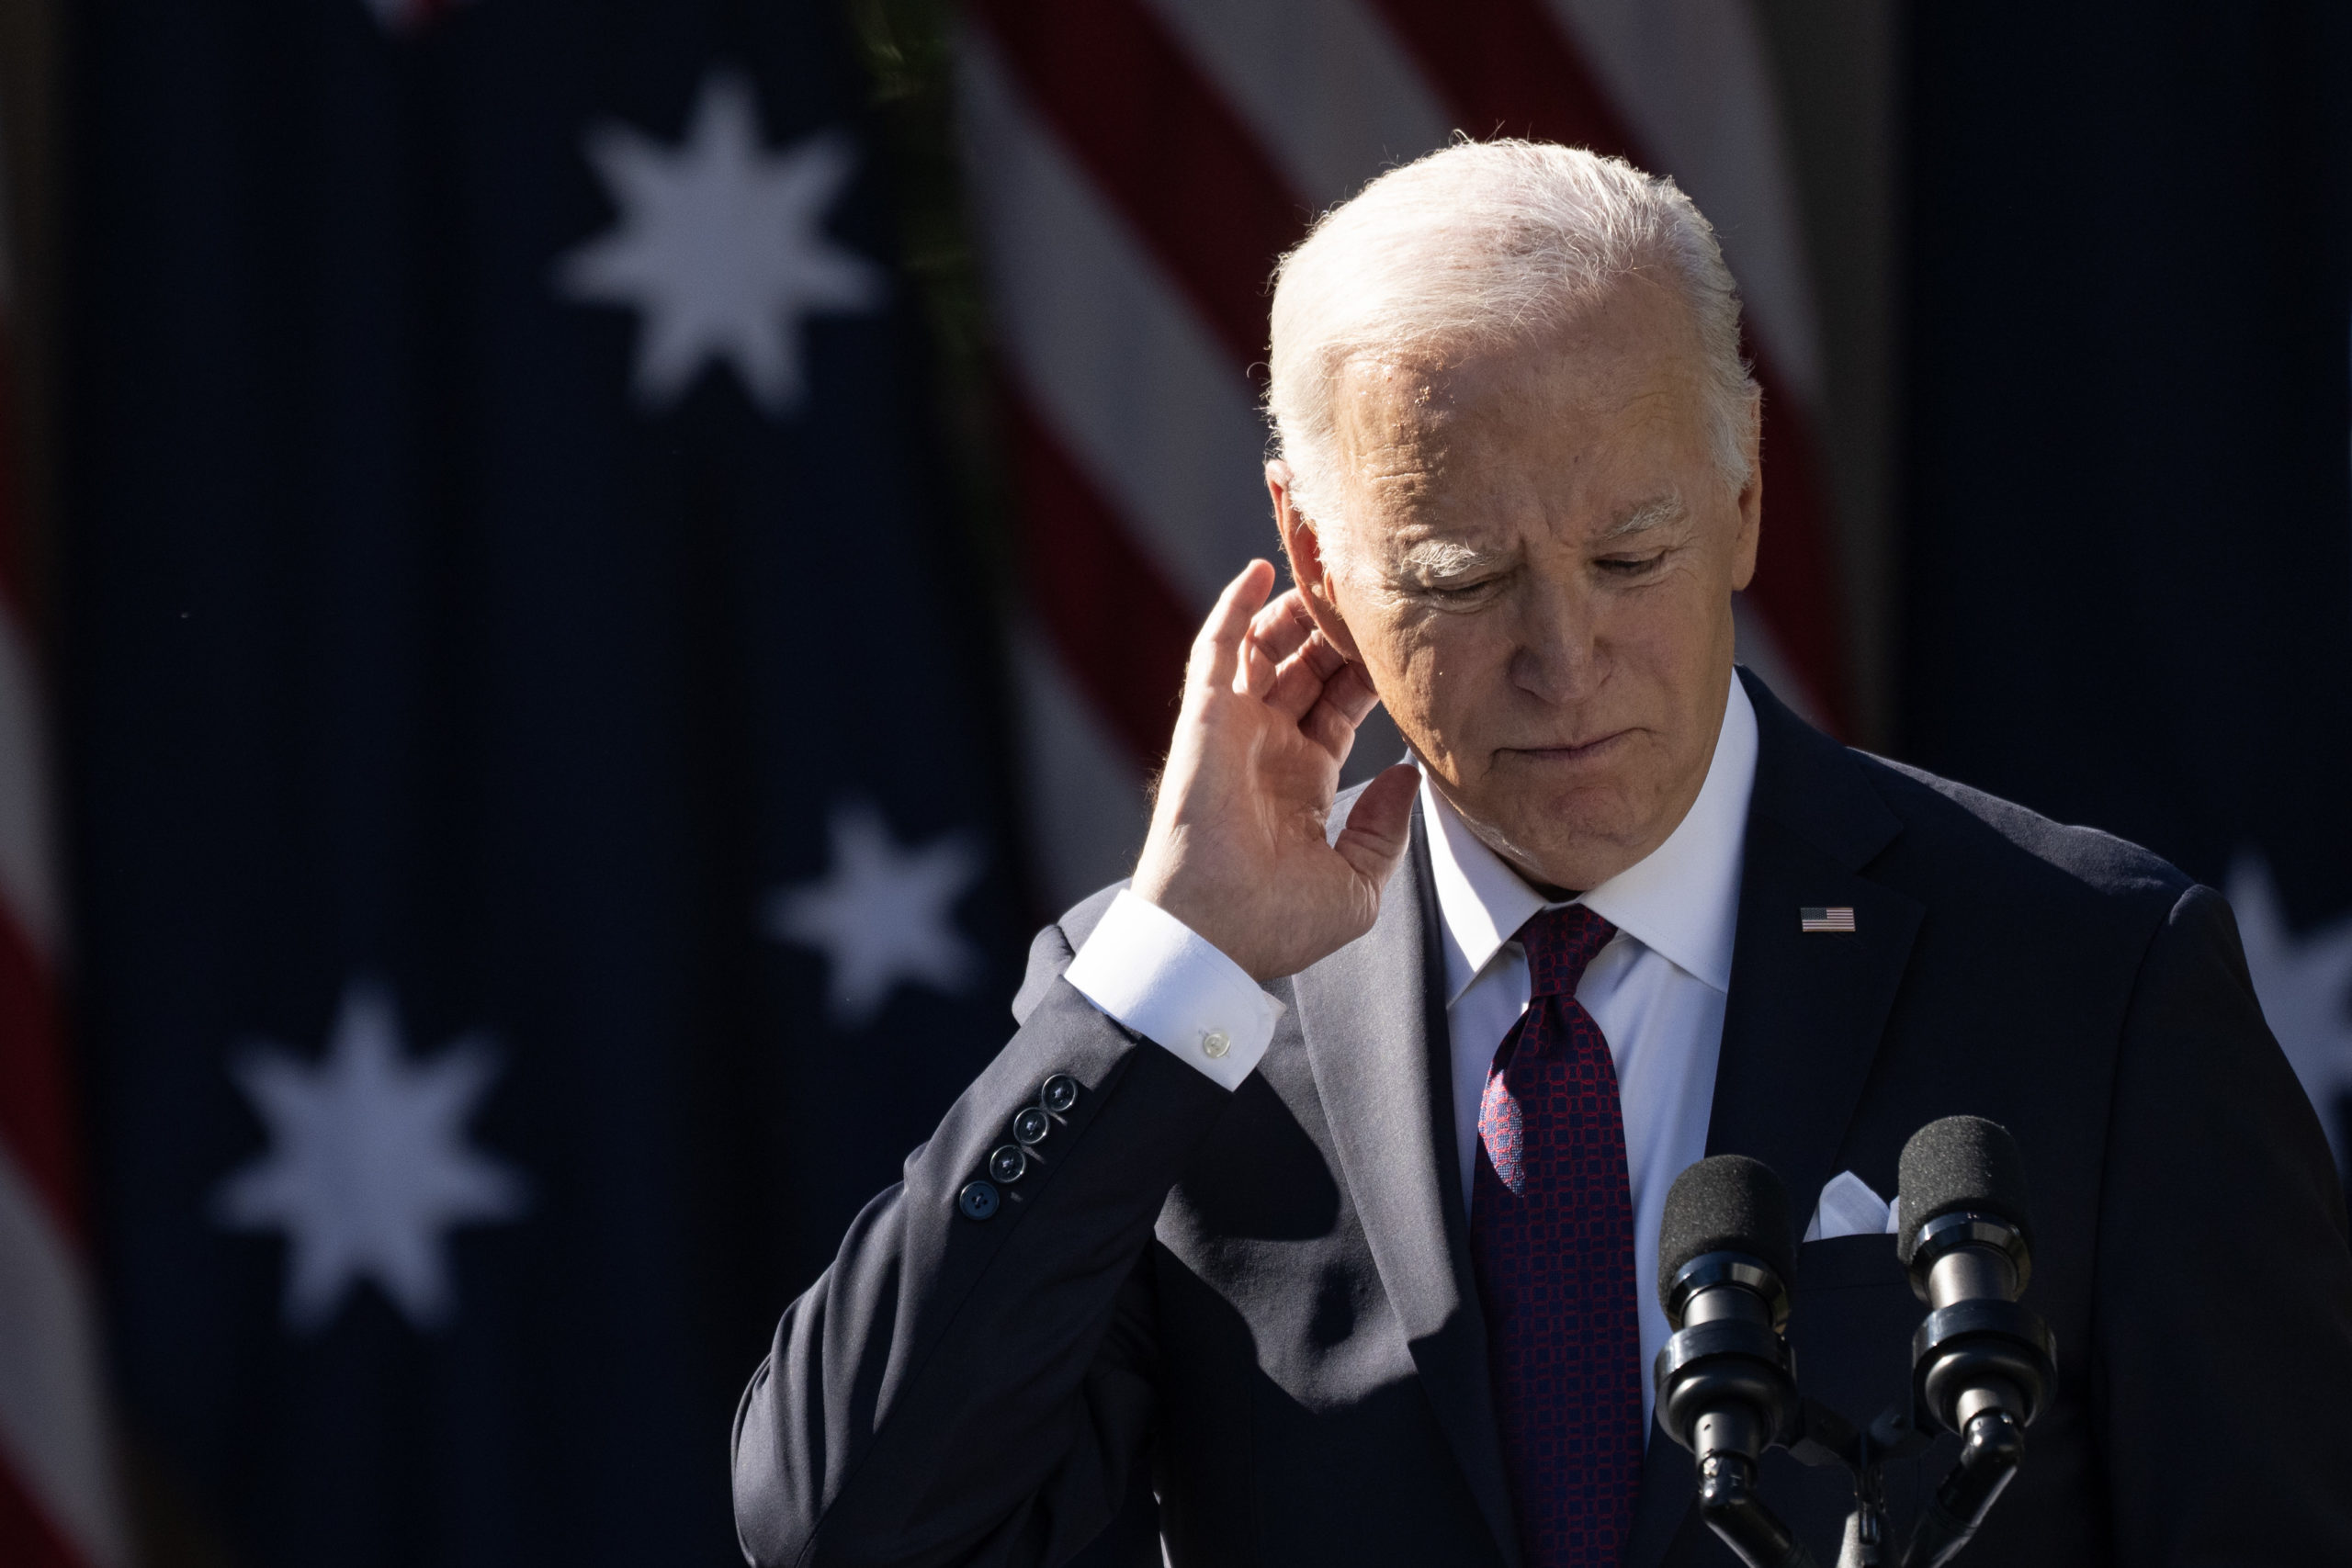 It looks as if President Joe Biden, seen at a Wednesday news conference, will face an additional Democratic challenger in the 2024 presidential campaign.